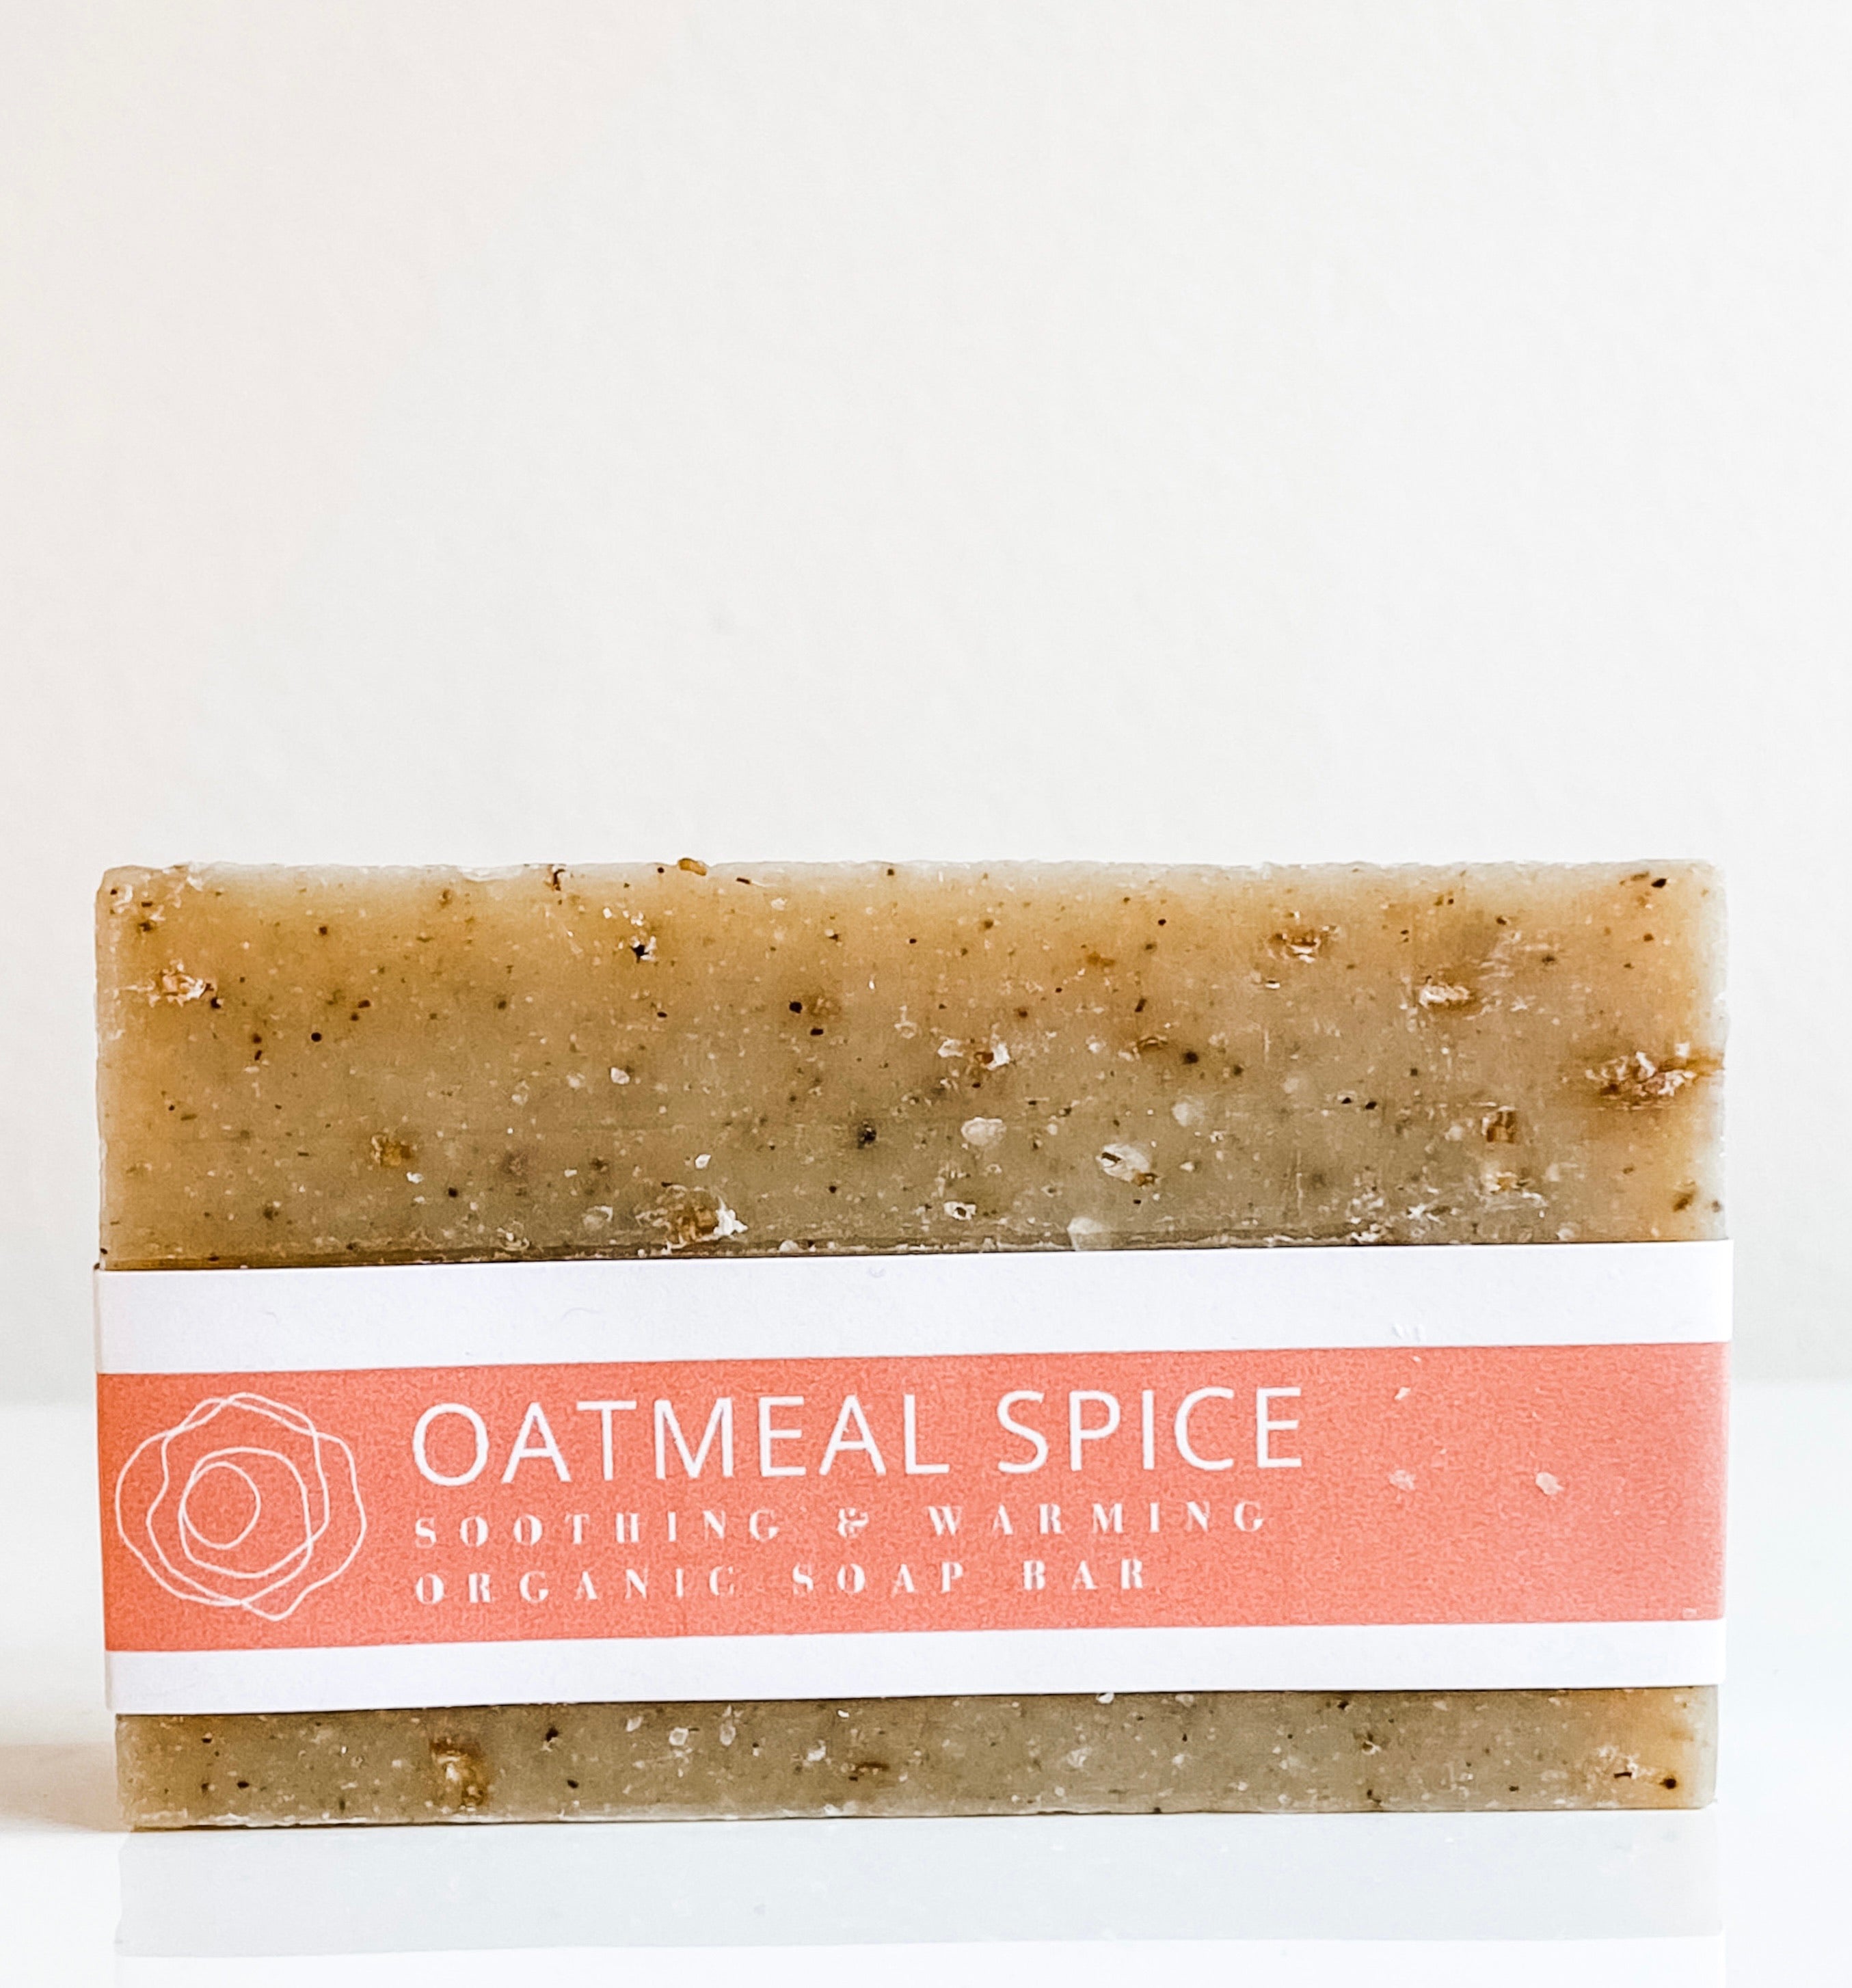 Organic Bar Soap - Oatmeal + Spice - Handmade with Natural Ingredients. Hidden Forest Naturals